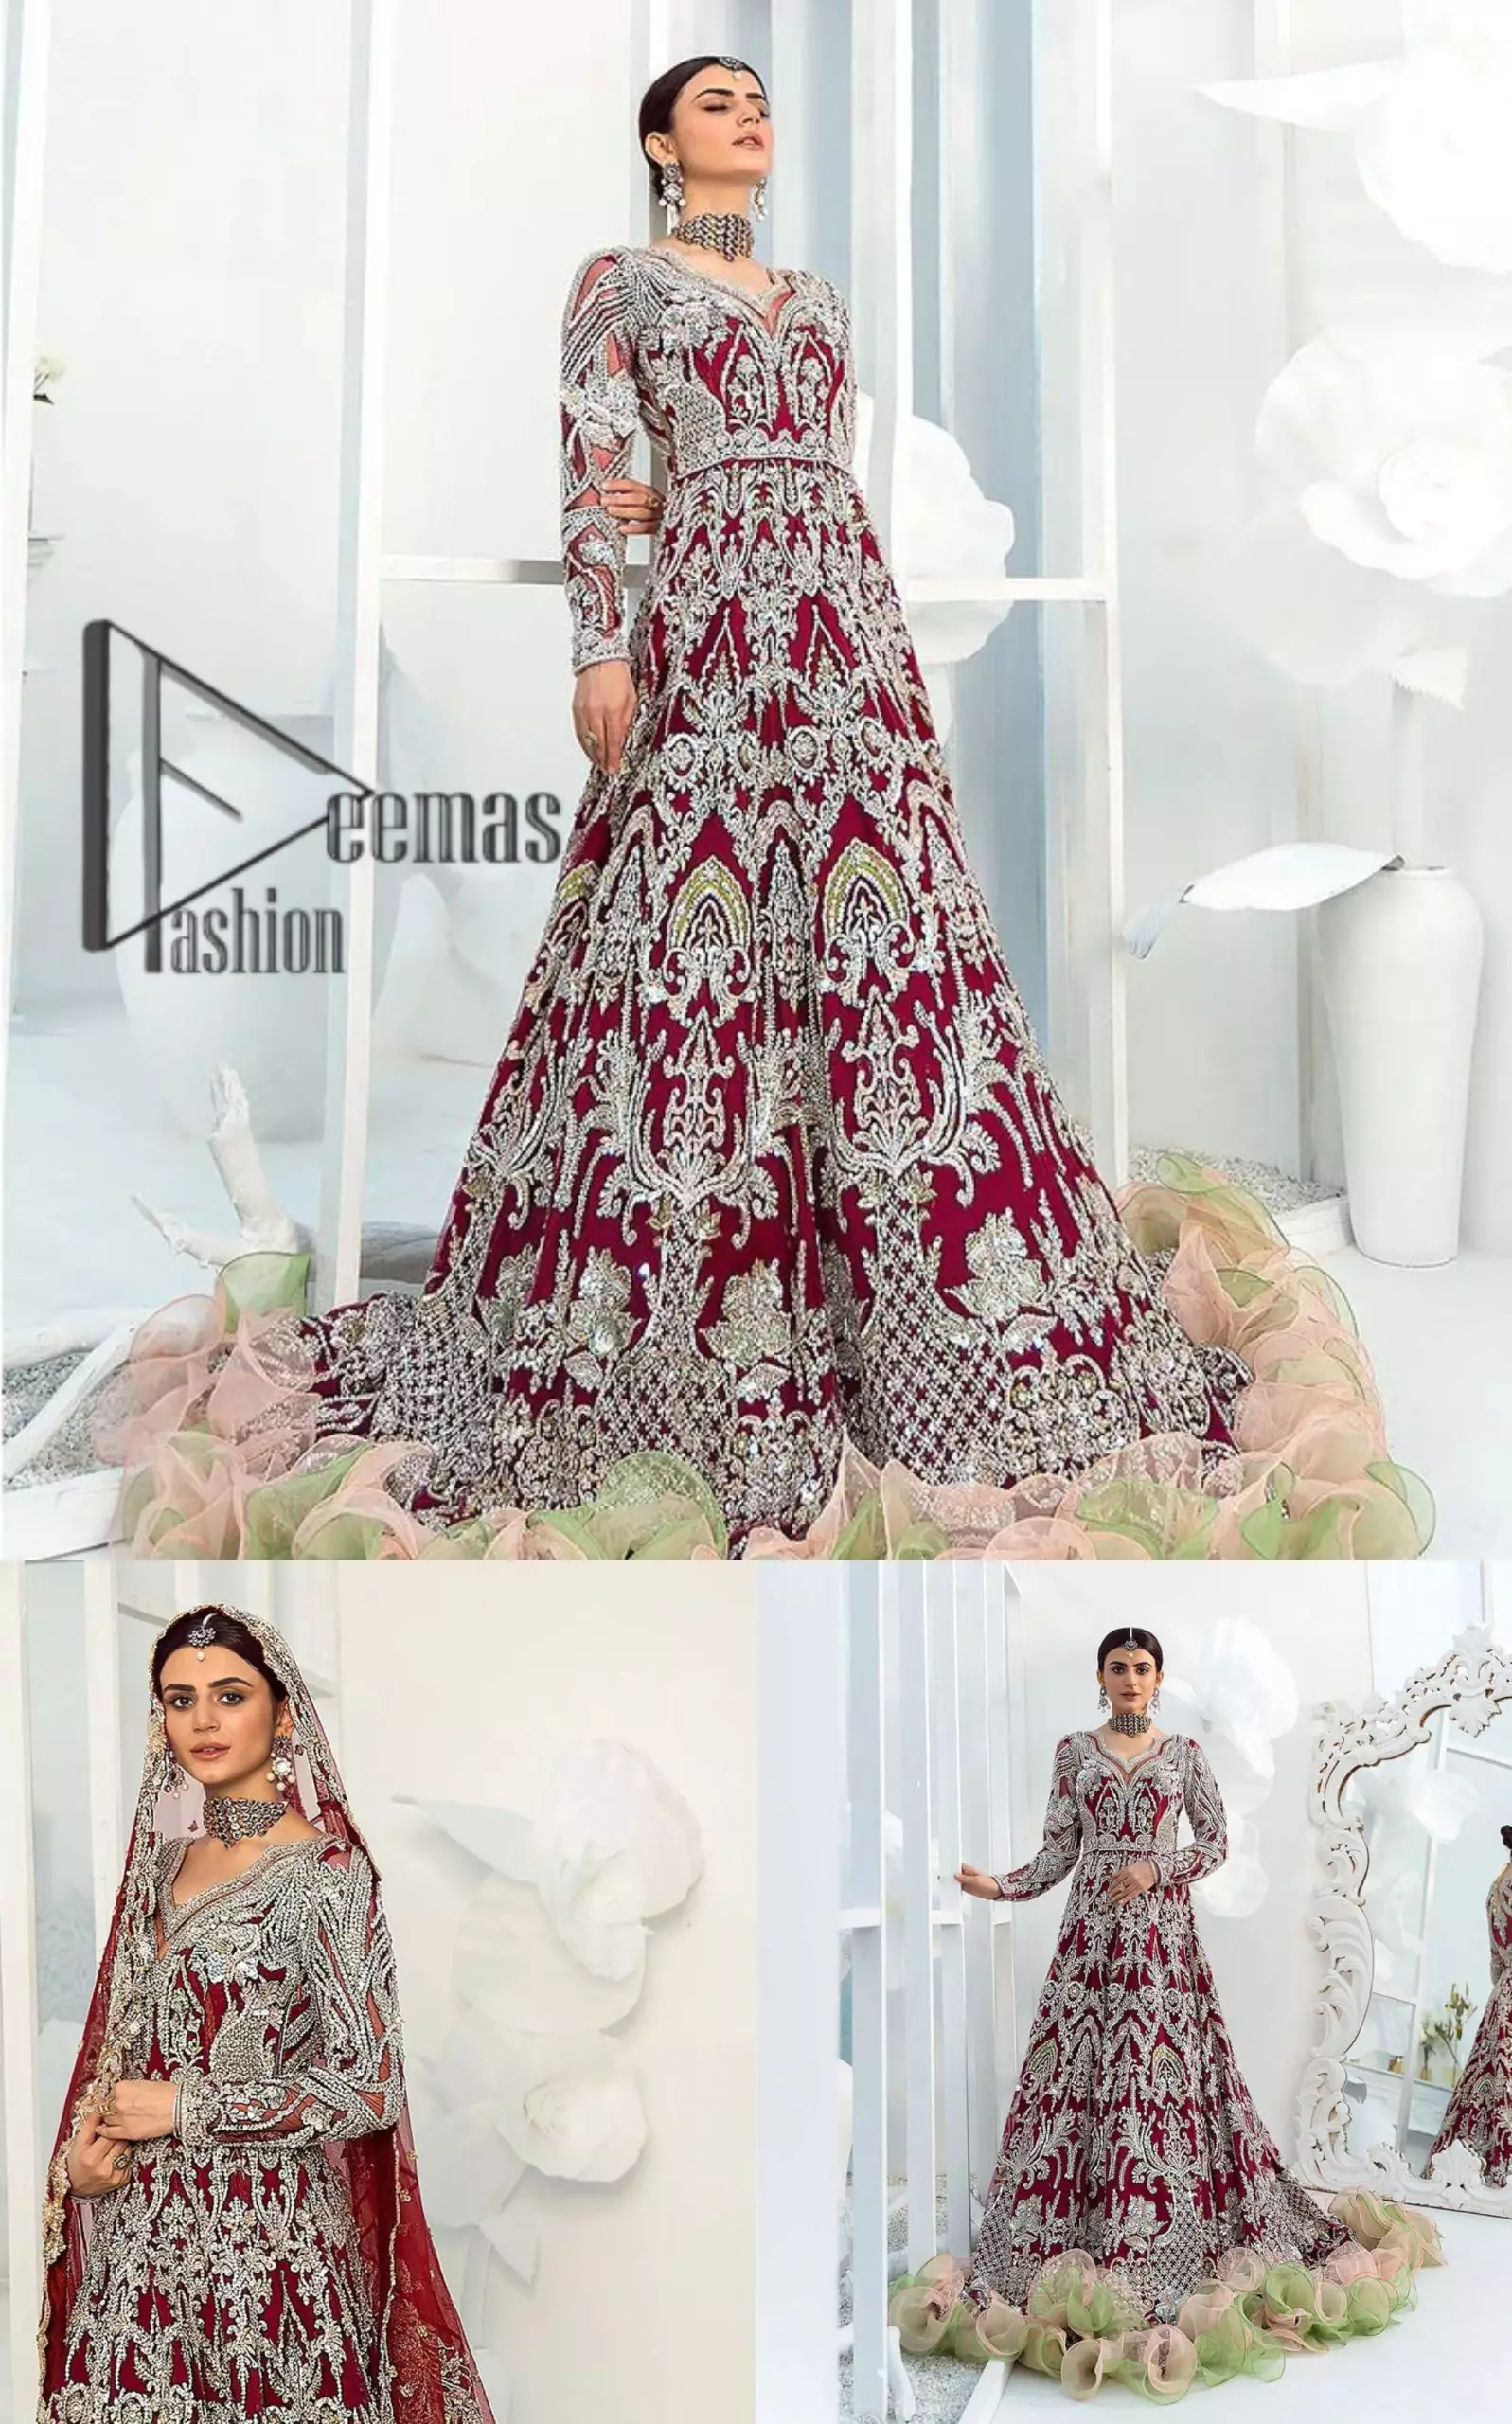 We're sure the majority of you women love slipping into "red outfits for weddings". So, Deemas Fashion presents undeniable vivacity and charming glam of red which makes a bride steal everyone's heart. This red full-sleeved maxi is made with pure organza and is adorned with silver embroidery that includes kora, dabka and tilla work. Moreover, the sweetheart neckline of the maxi is also giving a dazzling effect to this super outfit. Pair it up with a red dupatta that is embellished with four side borders and sequins spray all over that gives you a stylish and aesthetic look on your big day.